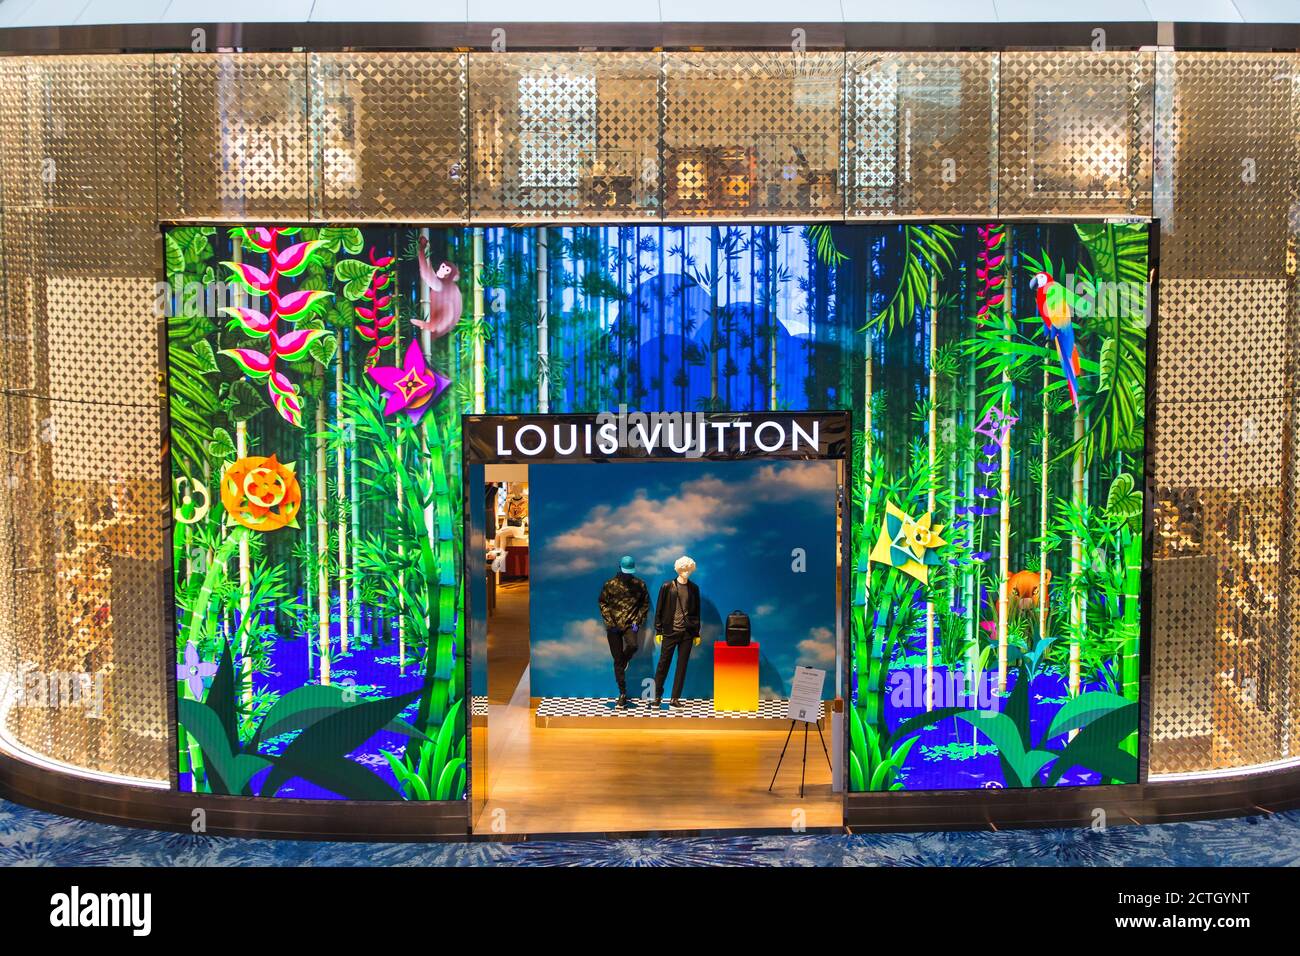 Page 2 - Lv Store High Resolution Stock Photography and Images - Alamy